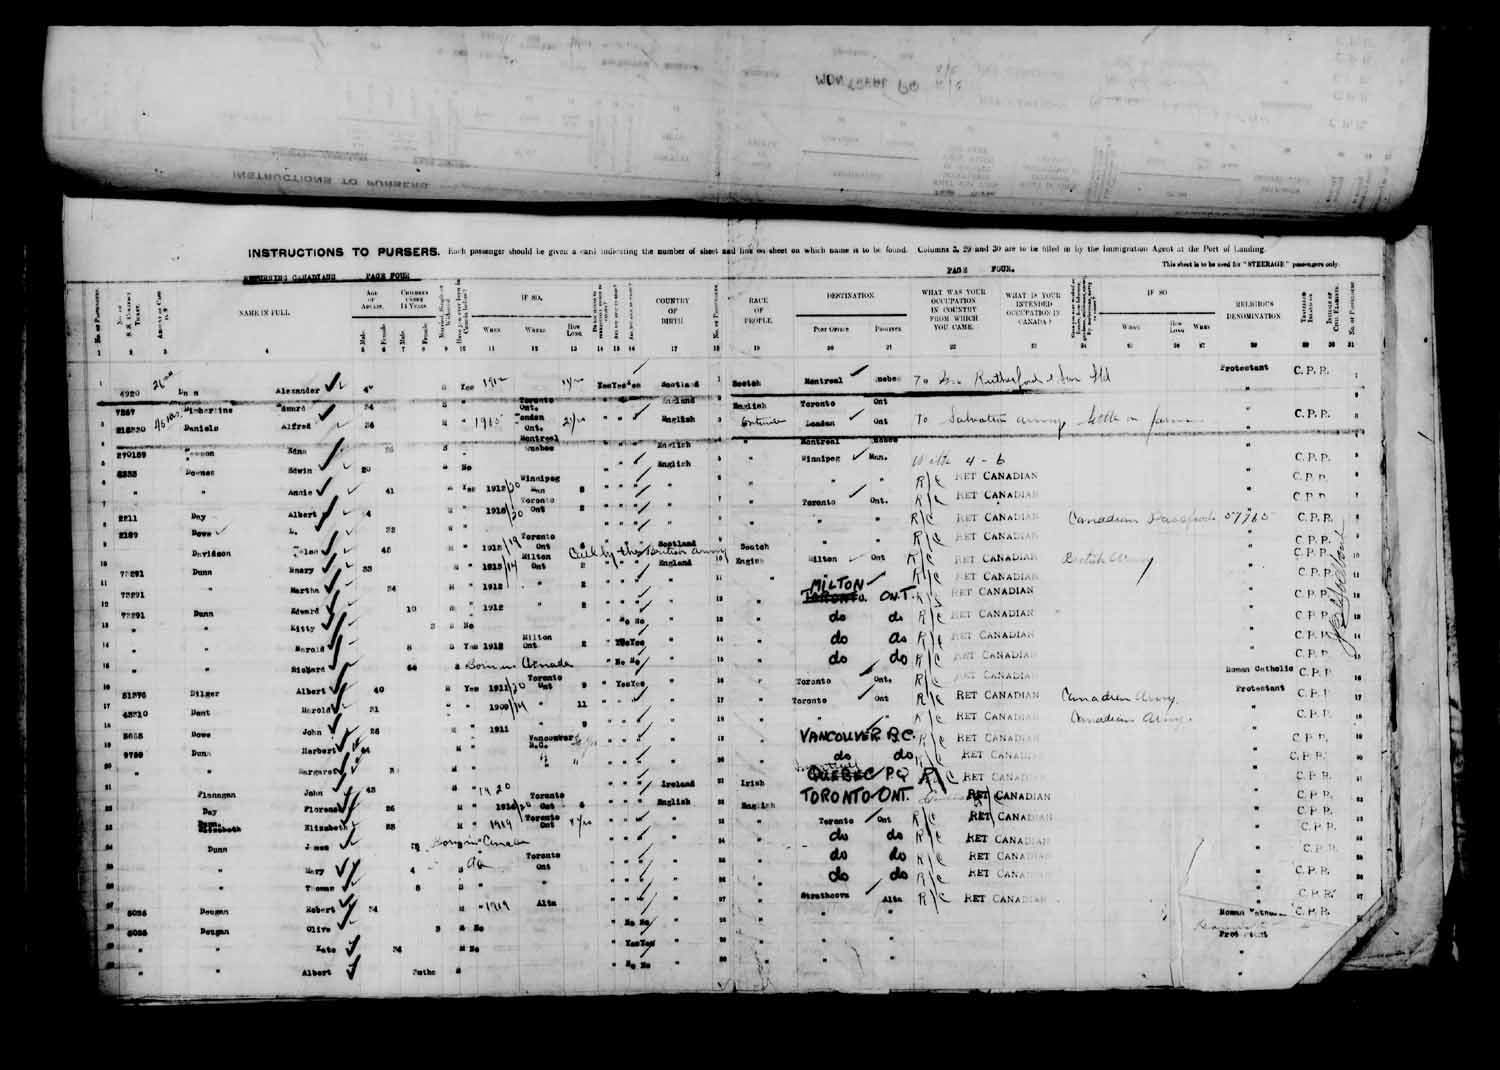 Digitized page of Passenger Lists for Image No.: e003610631